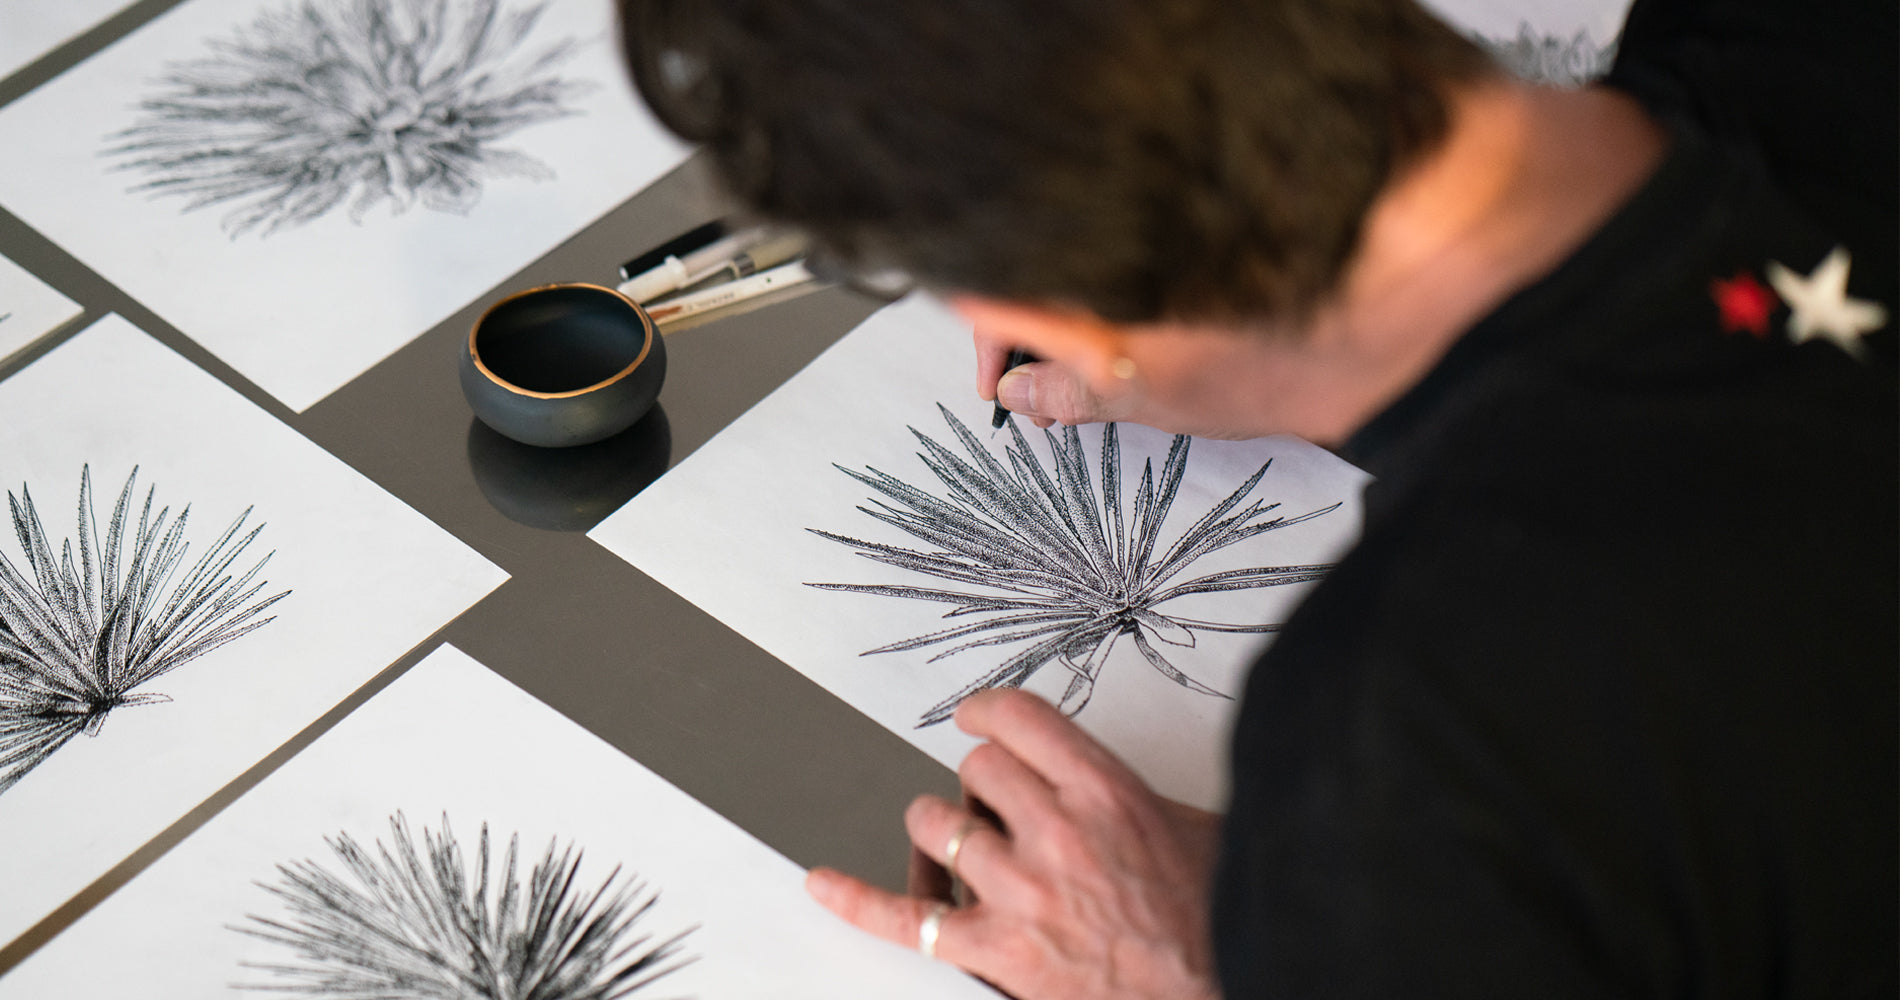 STEPHEN DRAWING AGAVE ILLUSTRATIONS